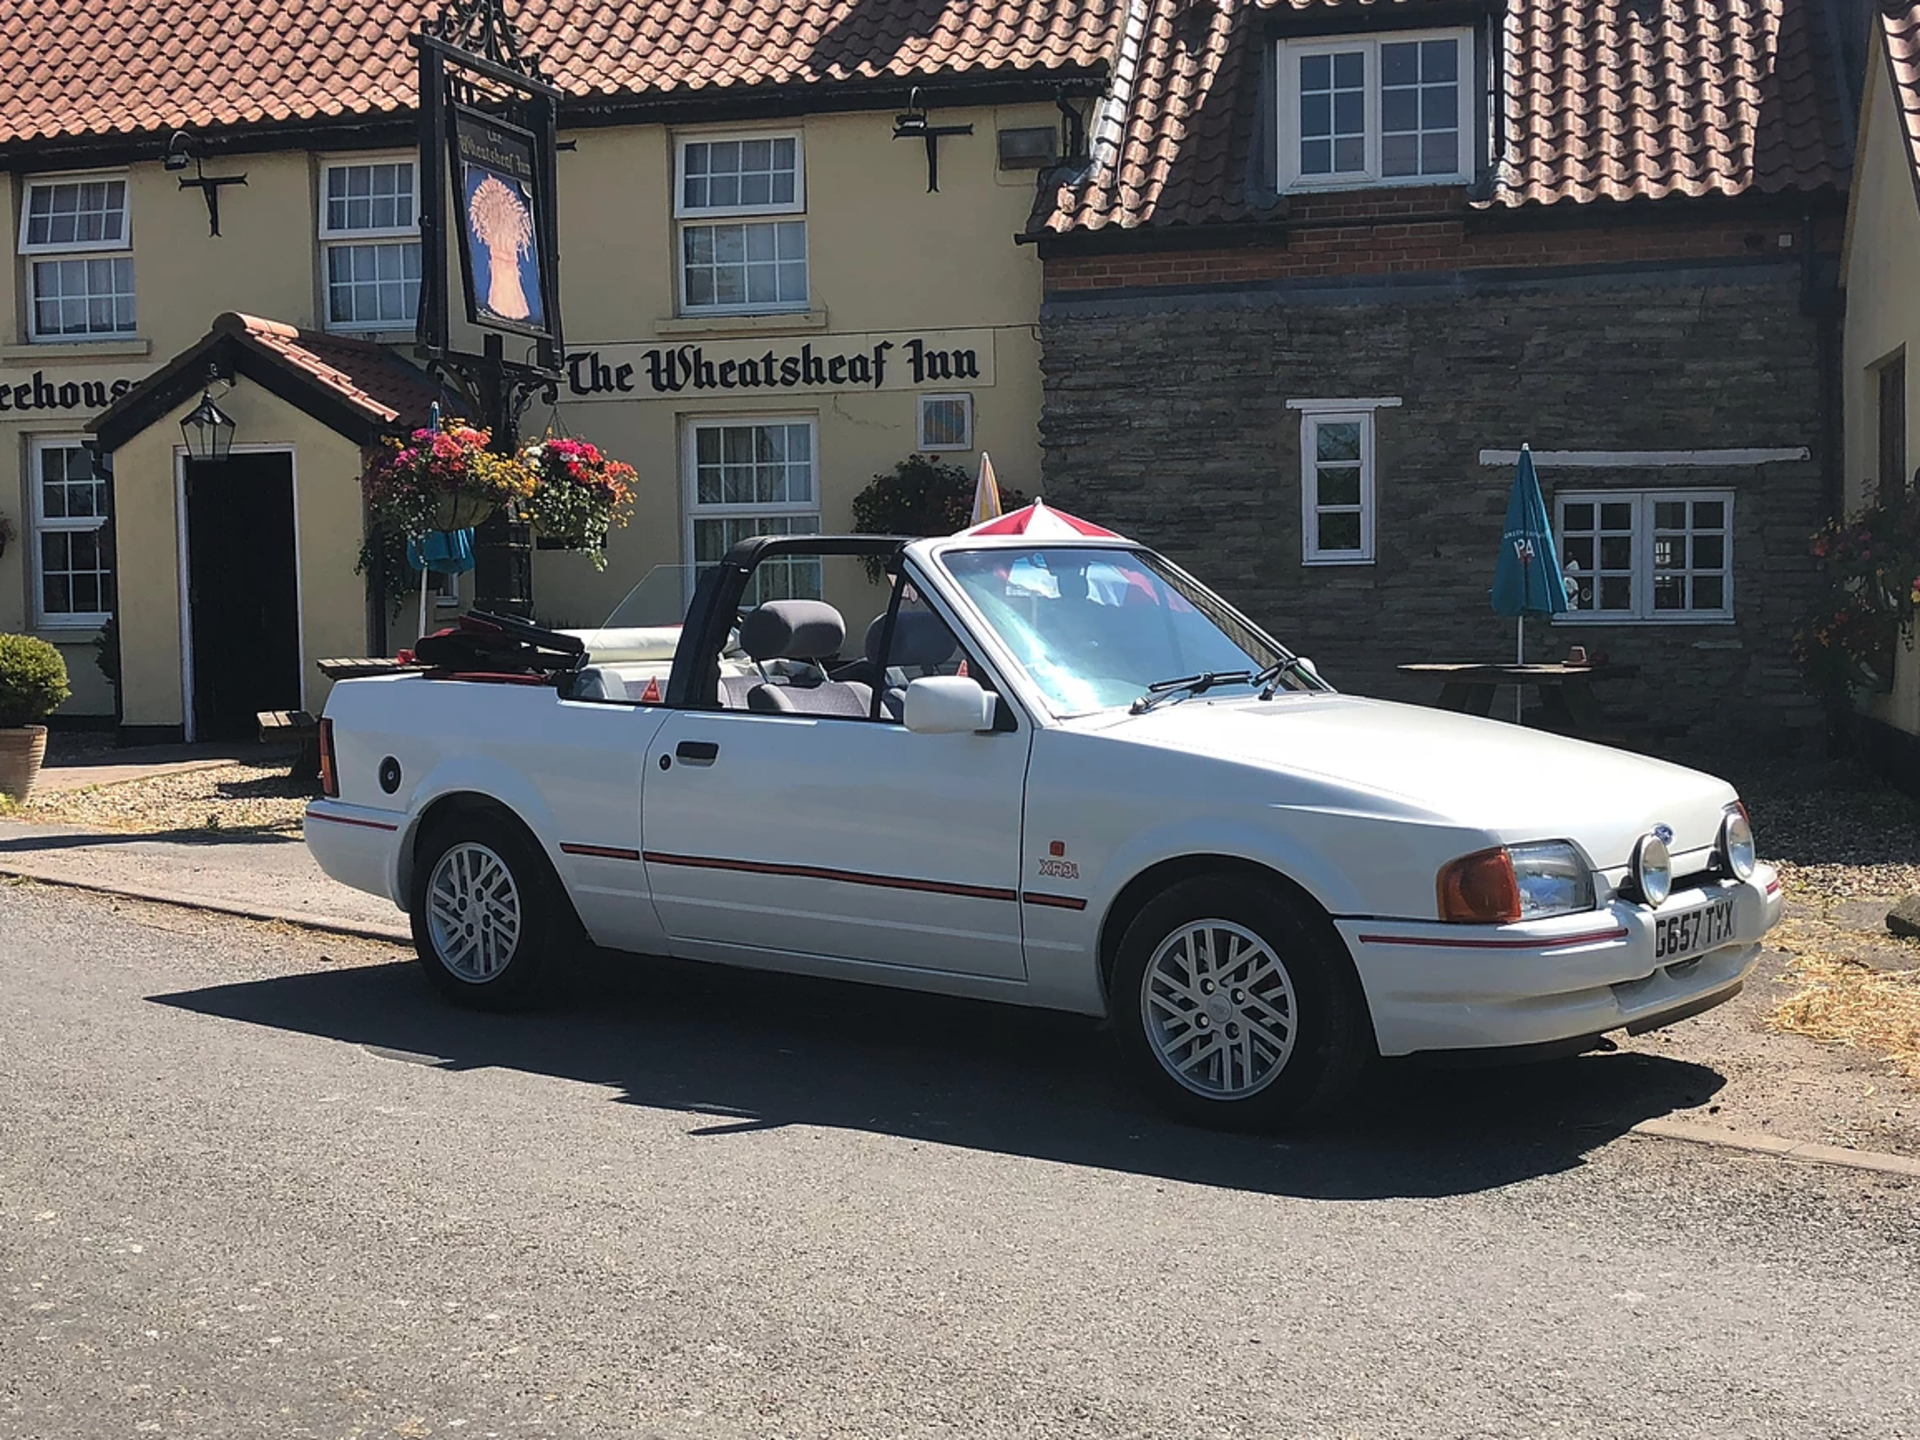 1989 Ford Escort XR3i Convertible - Image 3 of 13